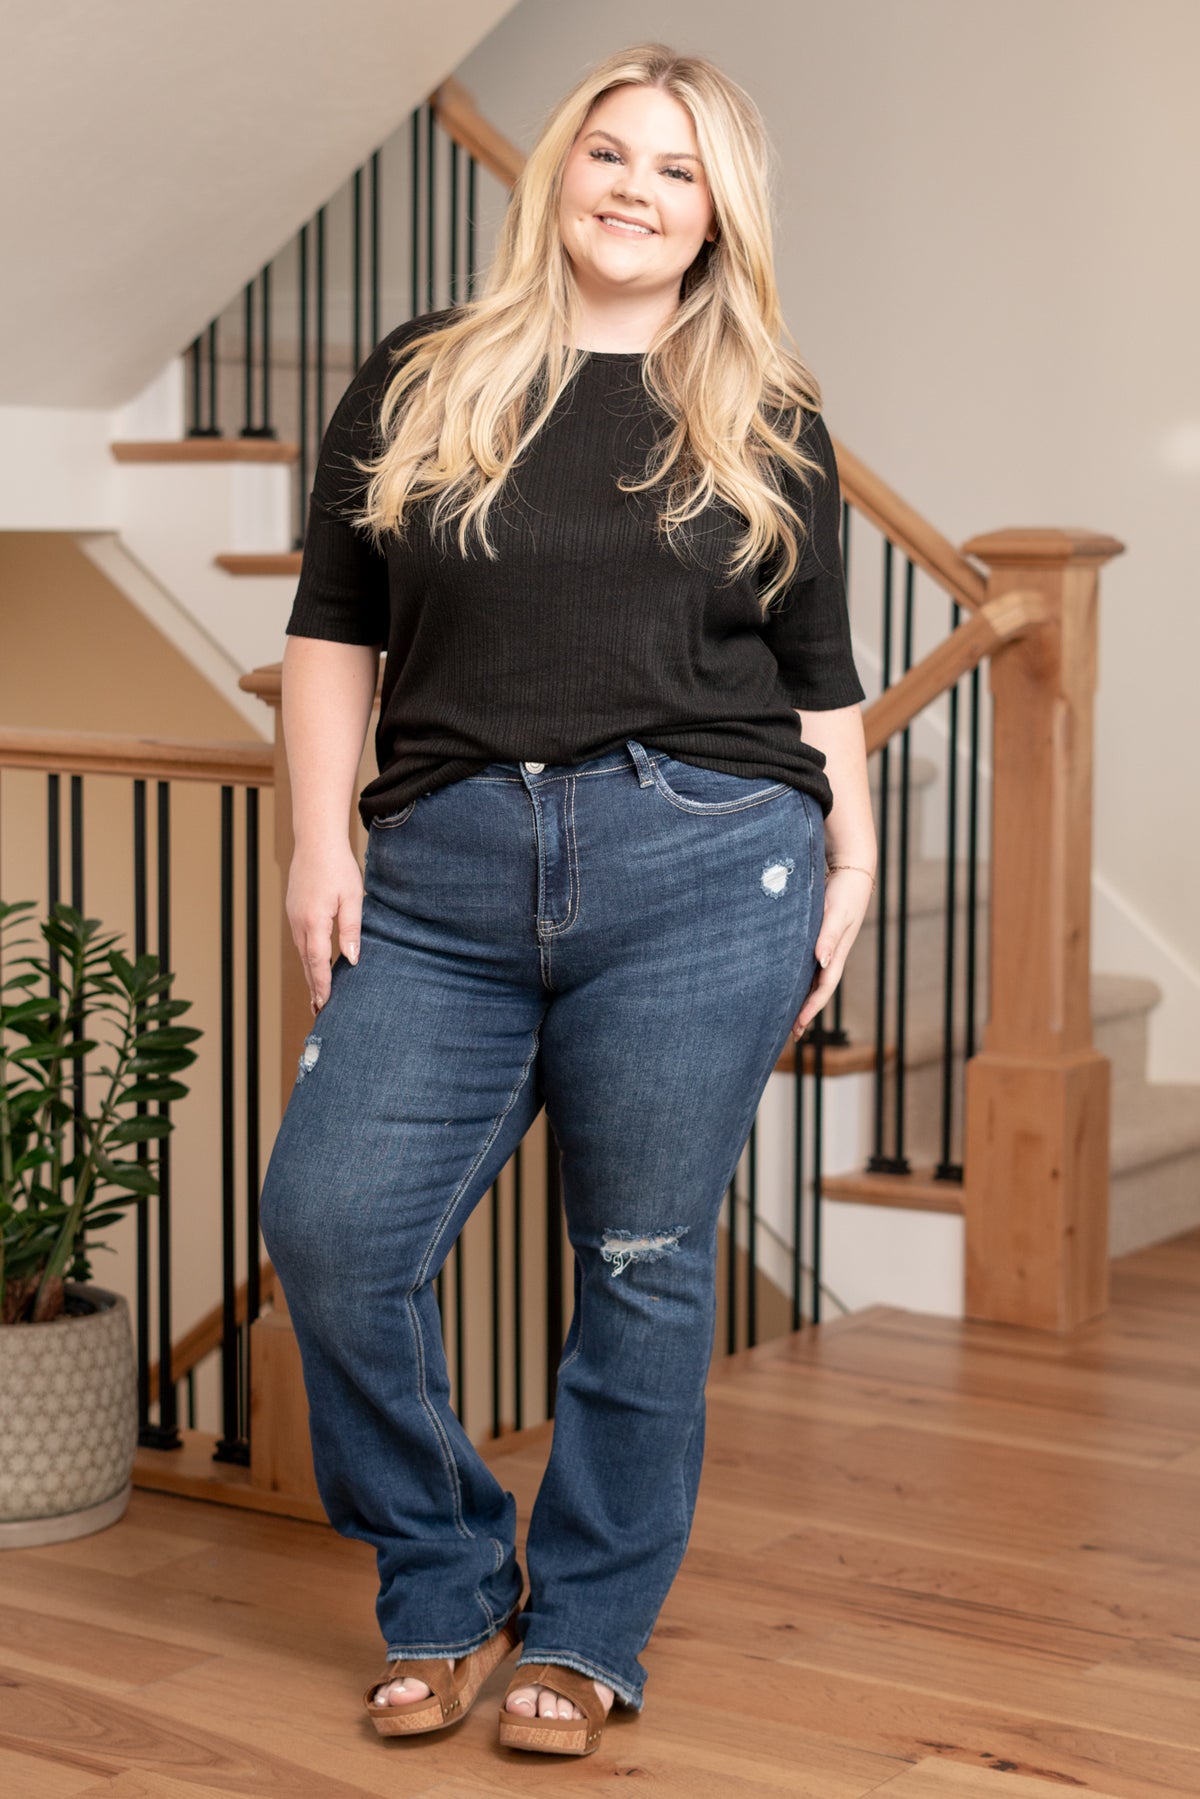 Lovervet by VERVET   Step into effortless style with the Advantages High Rise Flare jeans featuring distressed details. These jeans offer a flattering high-rise silhouette and a chic flare leg, creating a perfect blend of sophistication and casual flair. The distressed details add a touch of edge, making them a versatile choice for both laid-back and elevated look